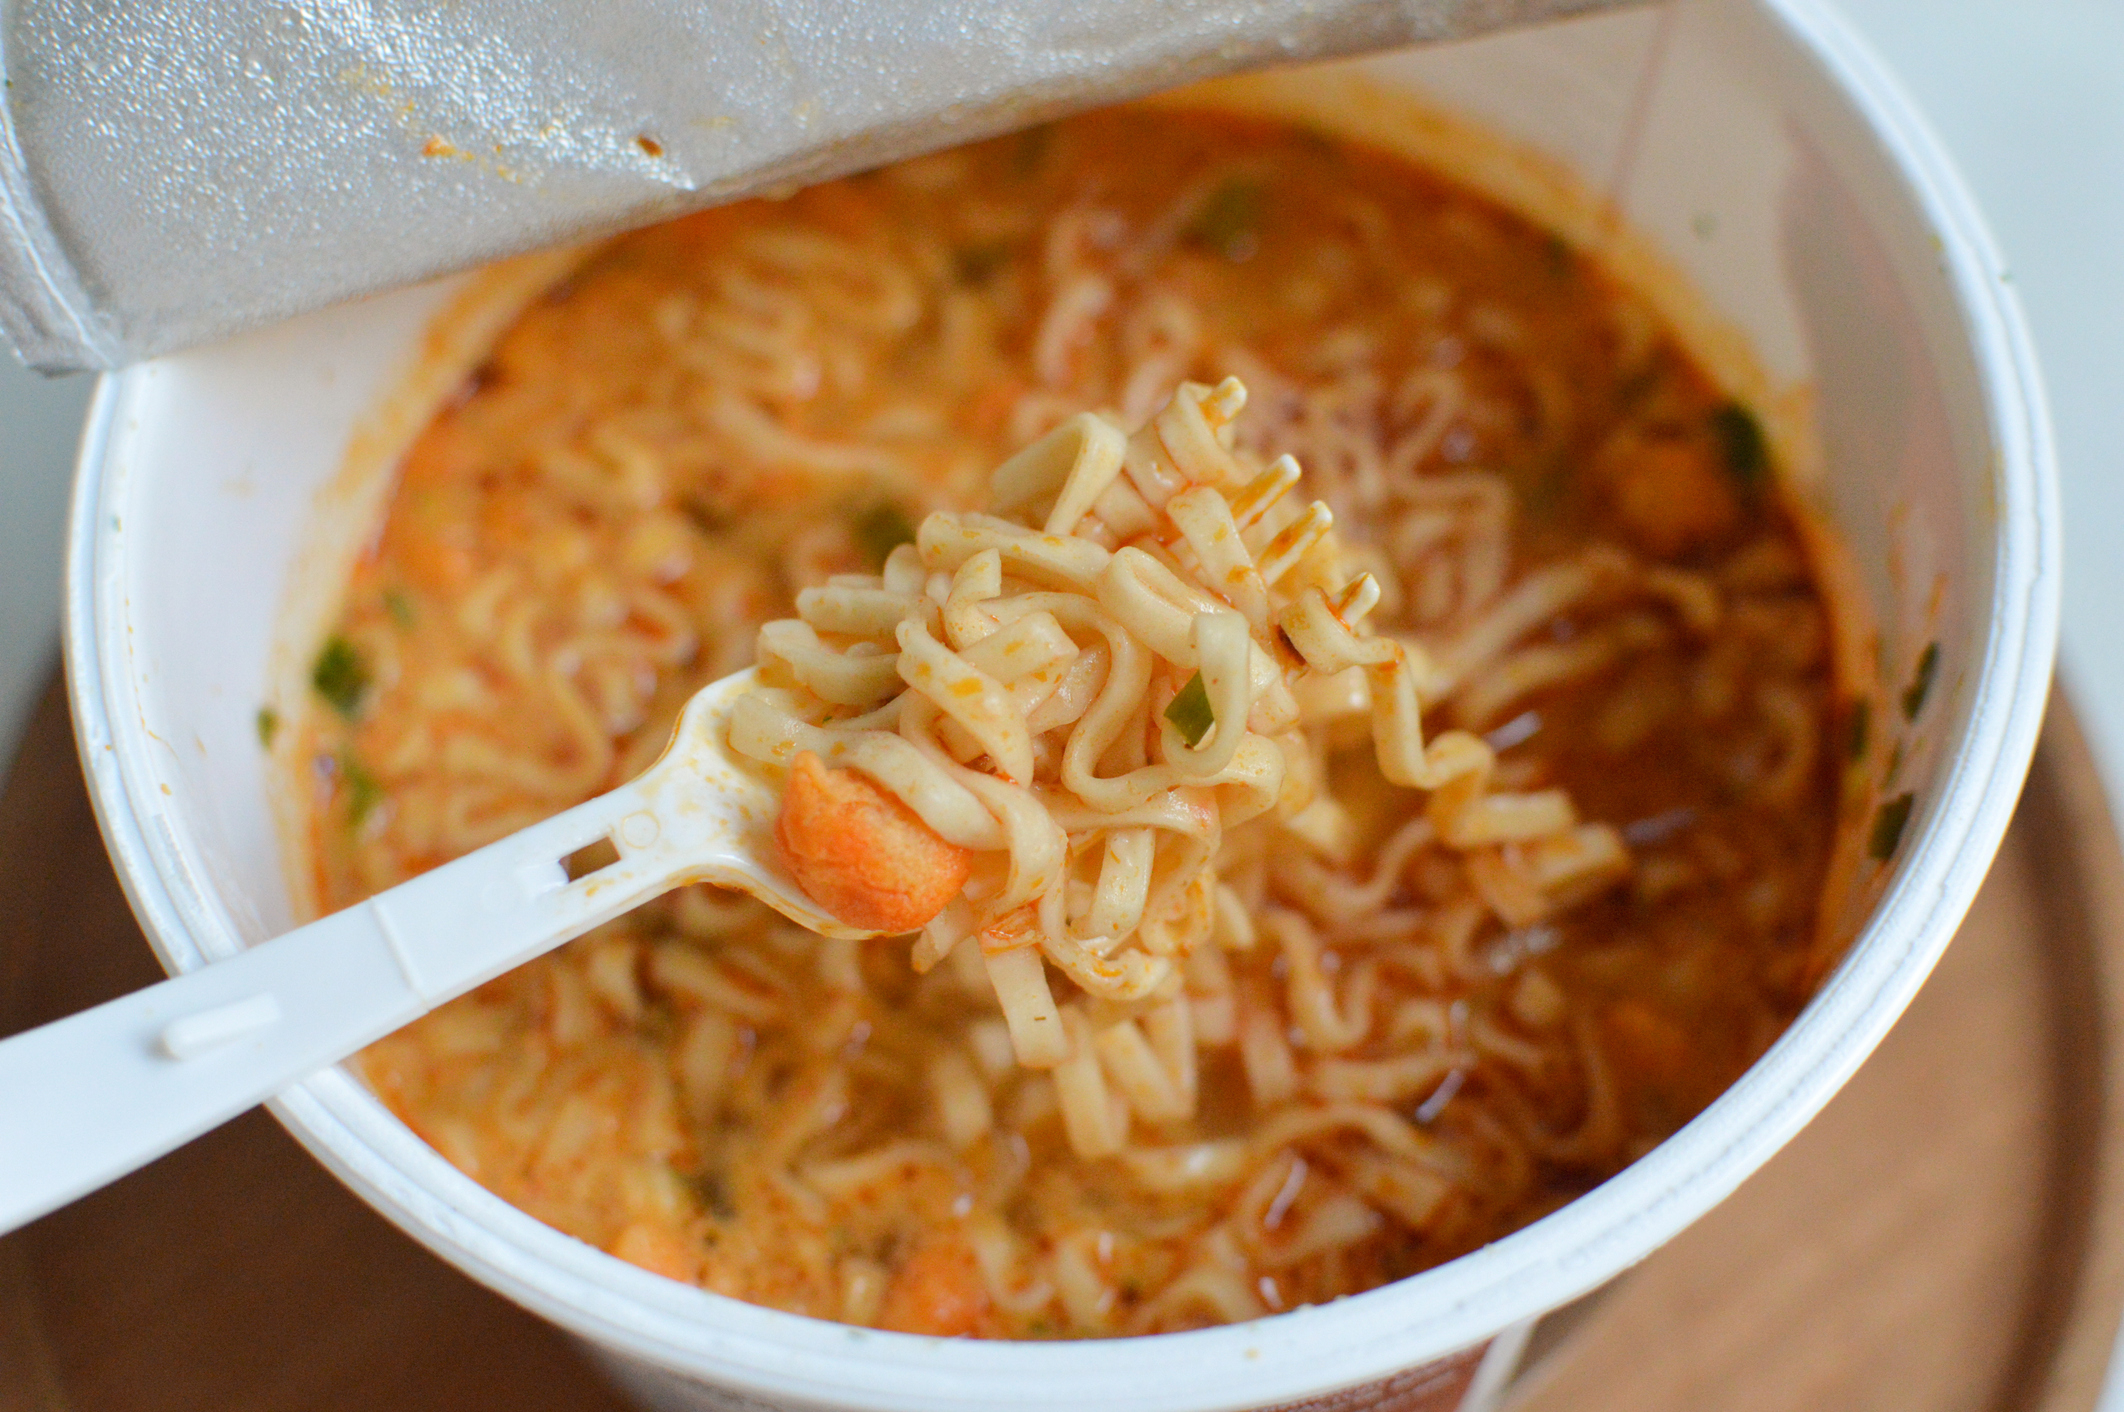 A close-up of a hand holding a fork with instant noodles; a cup of noodles is visible below